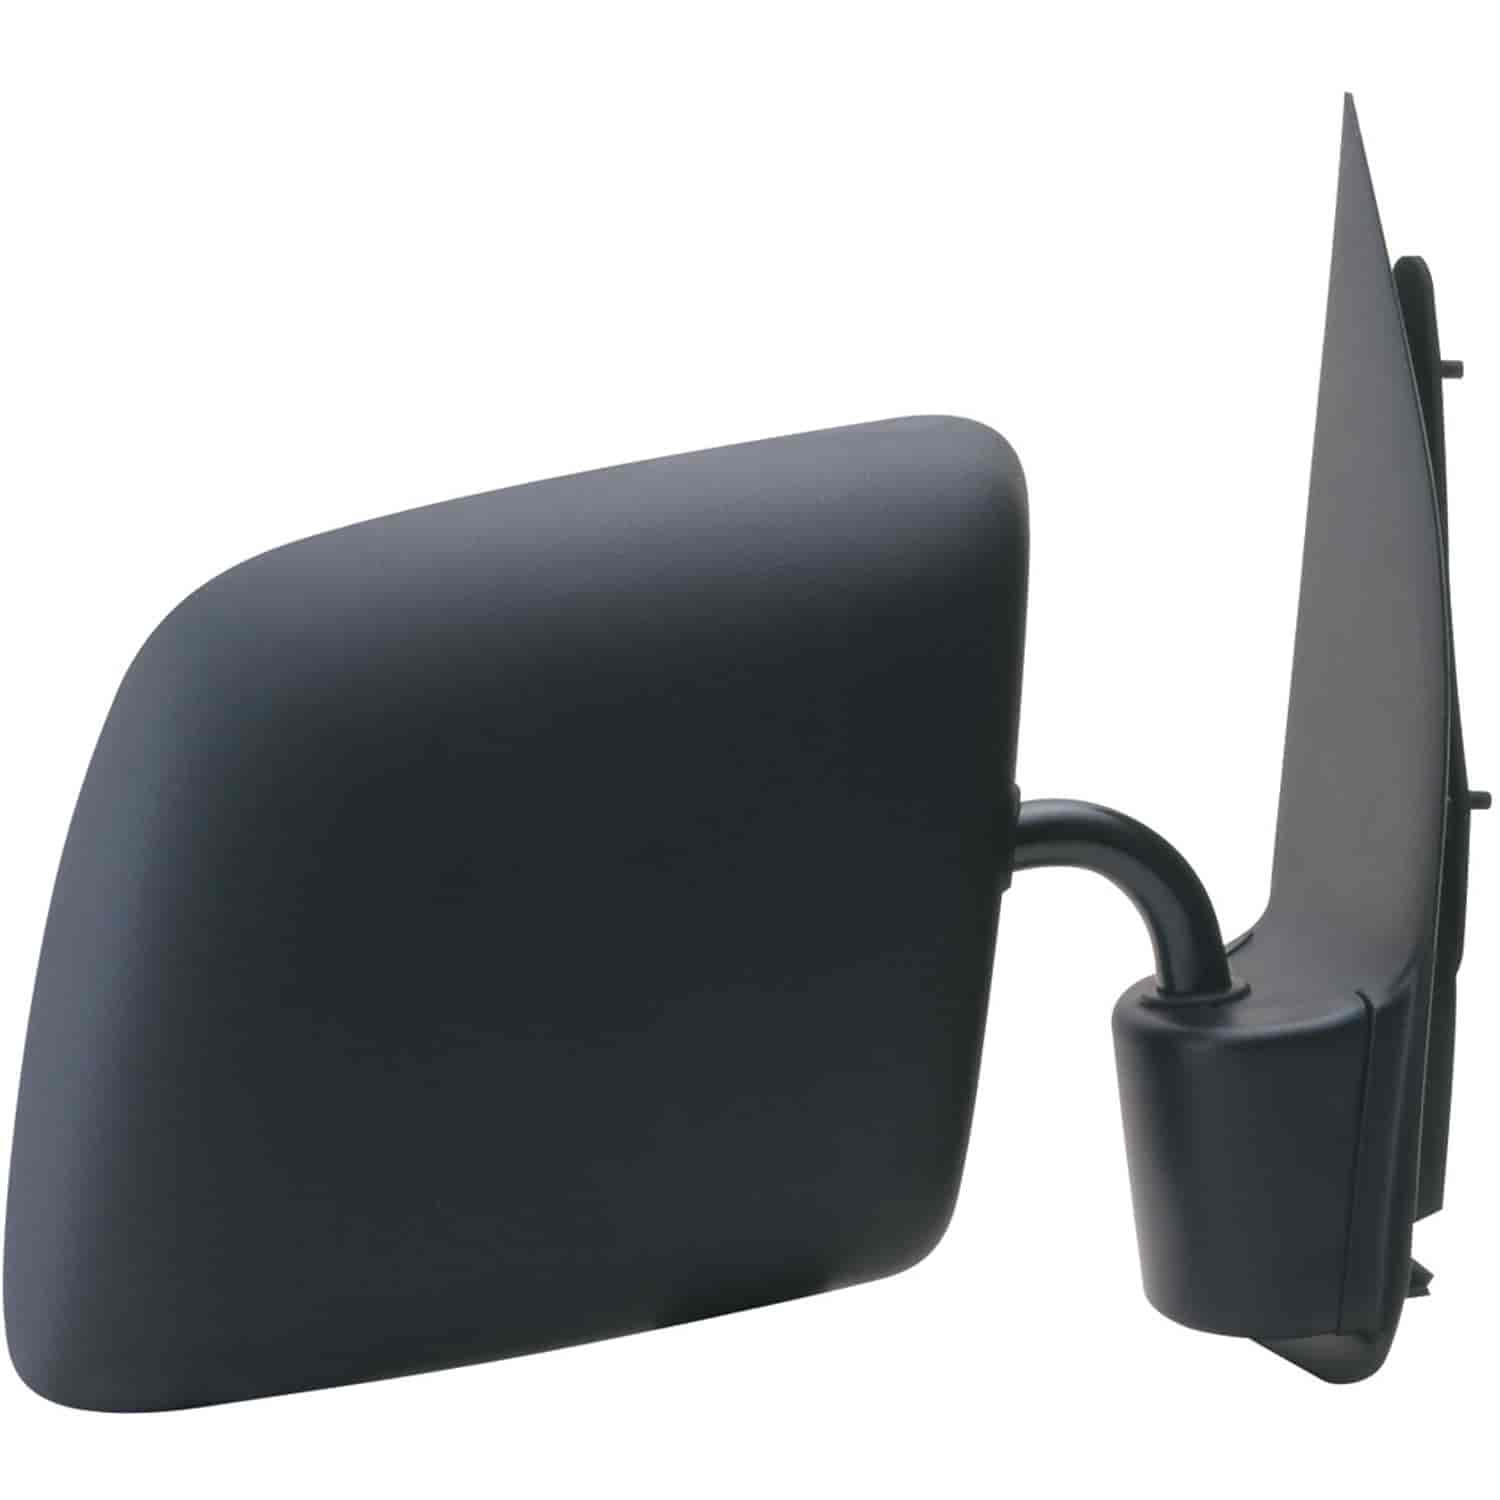 OEM Style Replacement mirror for 92-06 Ford Econoline Van passenger side mirror tested to fit and fu